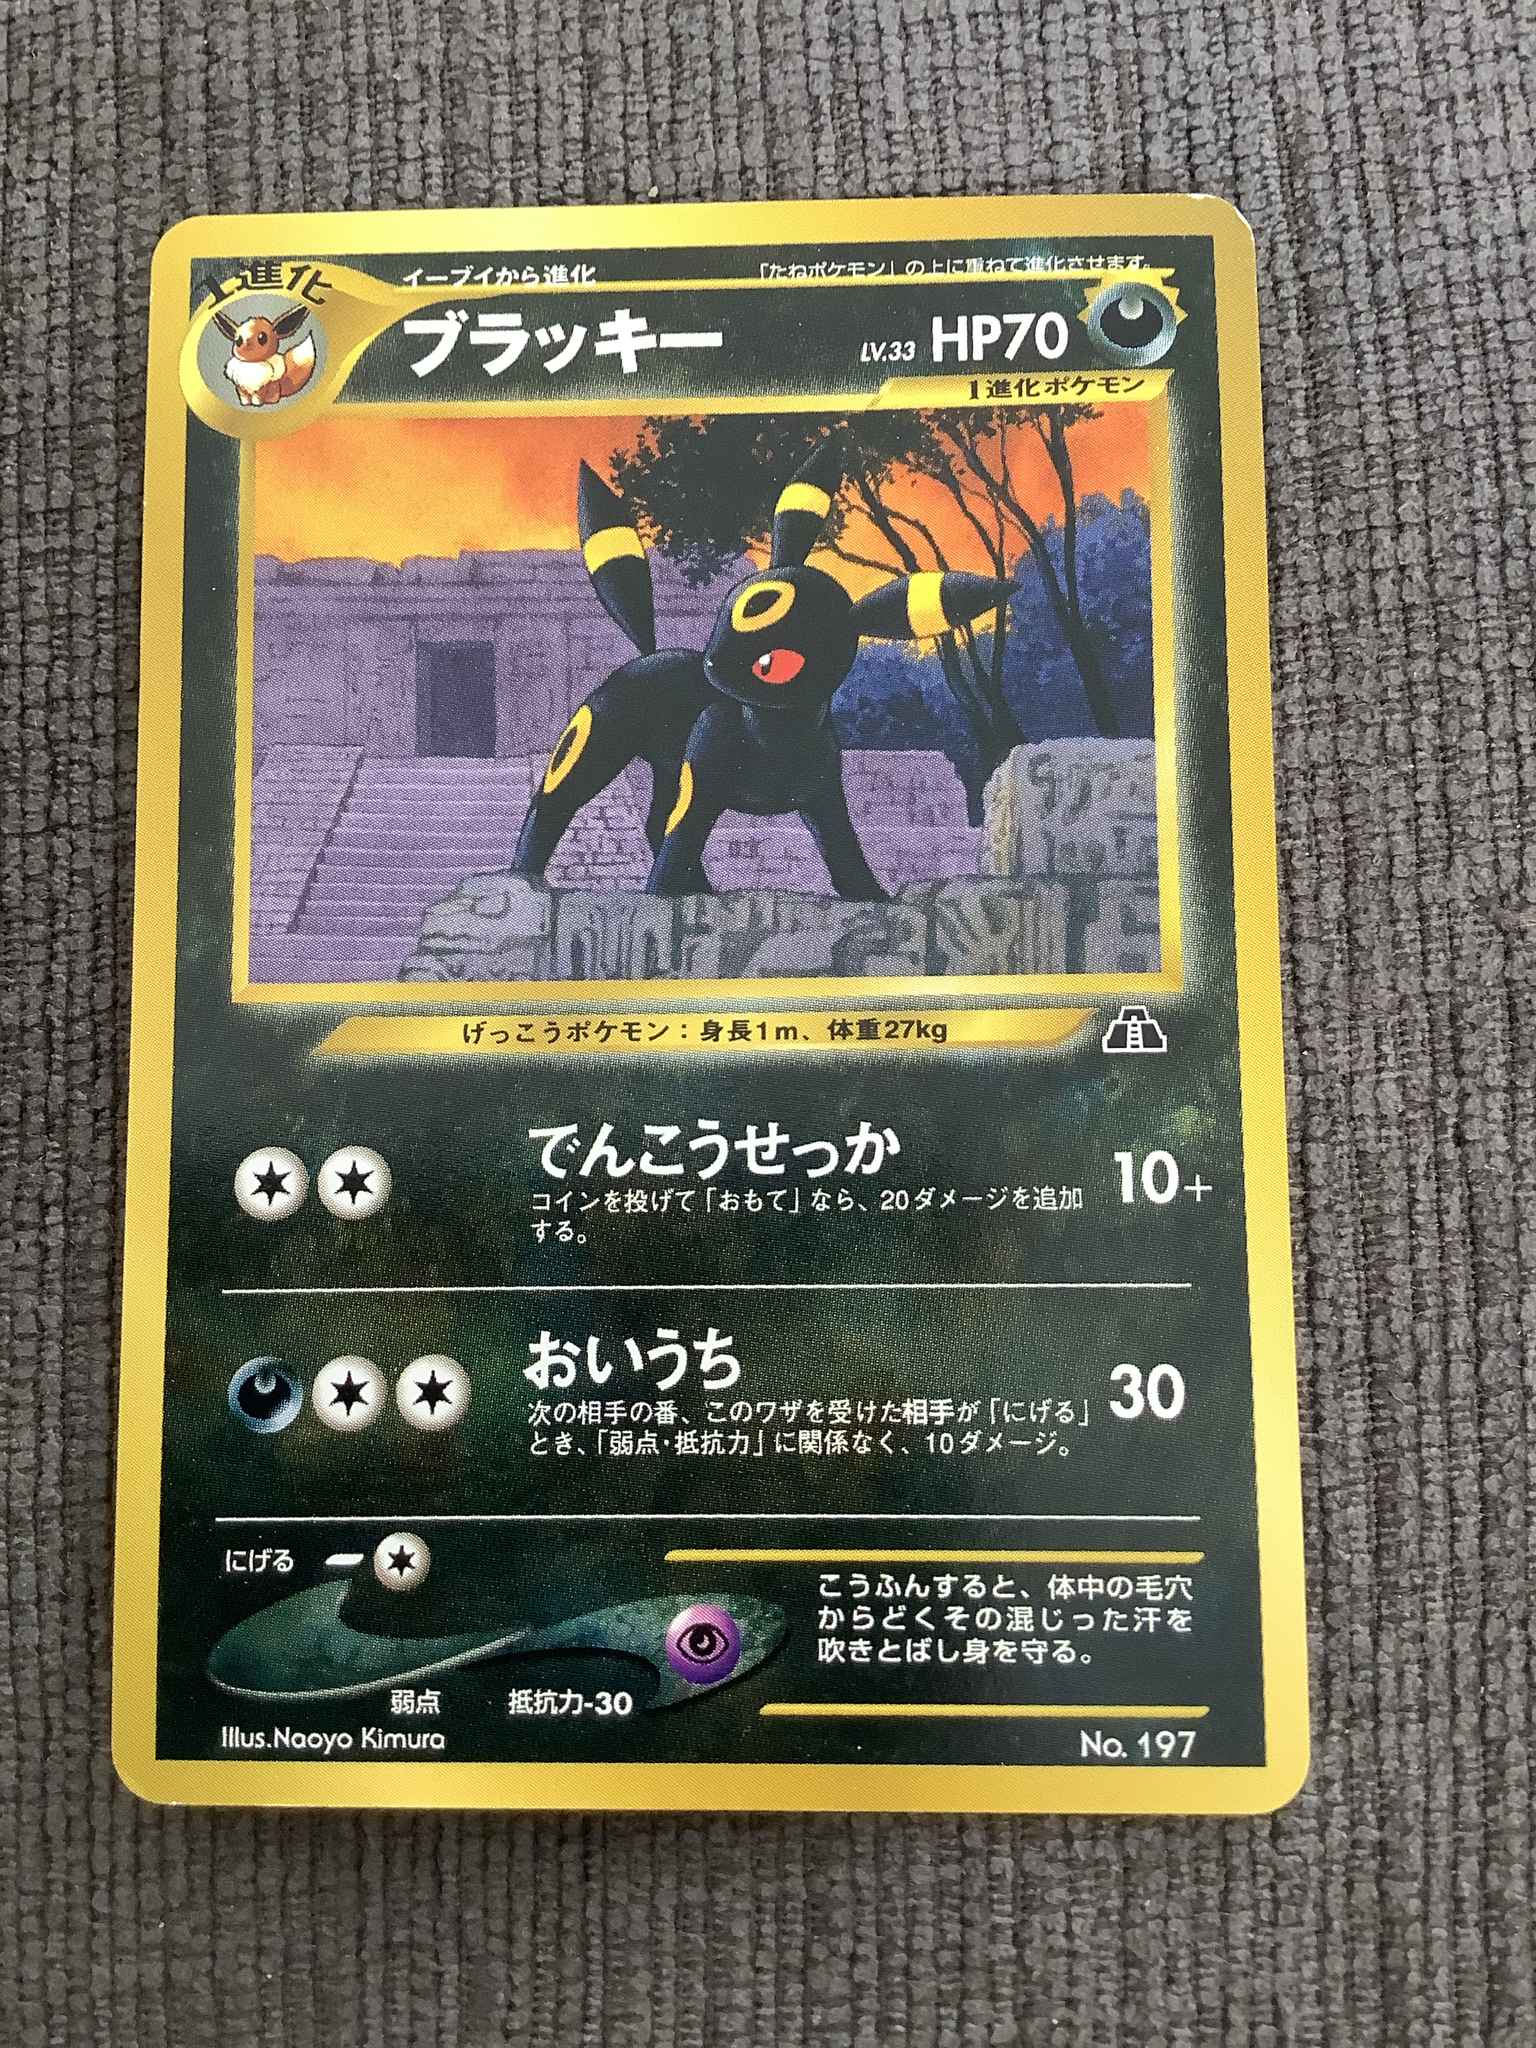 Umbreon 32 Umbreon 32 Neo Discovery Pokemon Online Gaming Store For Cards Miniatures Singles Packs Booster Boxes